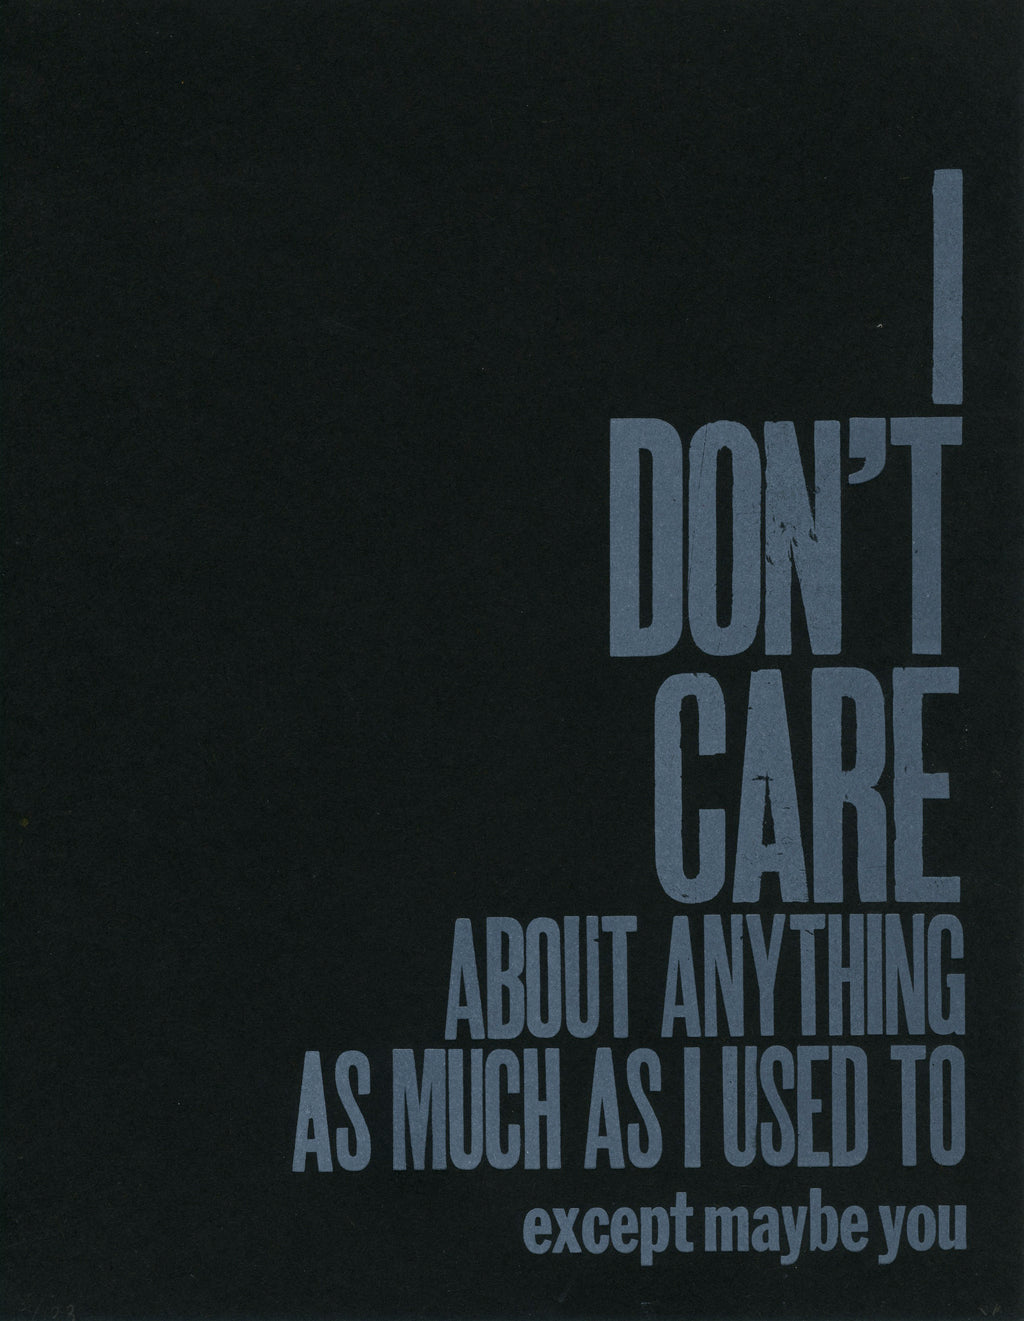 A letterpress image of the words "I don't care about anything as much as I used to. Except maybe you." in white ink on black paper.